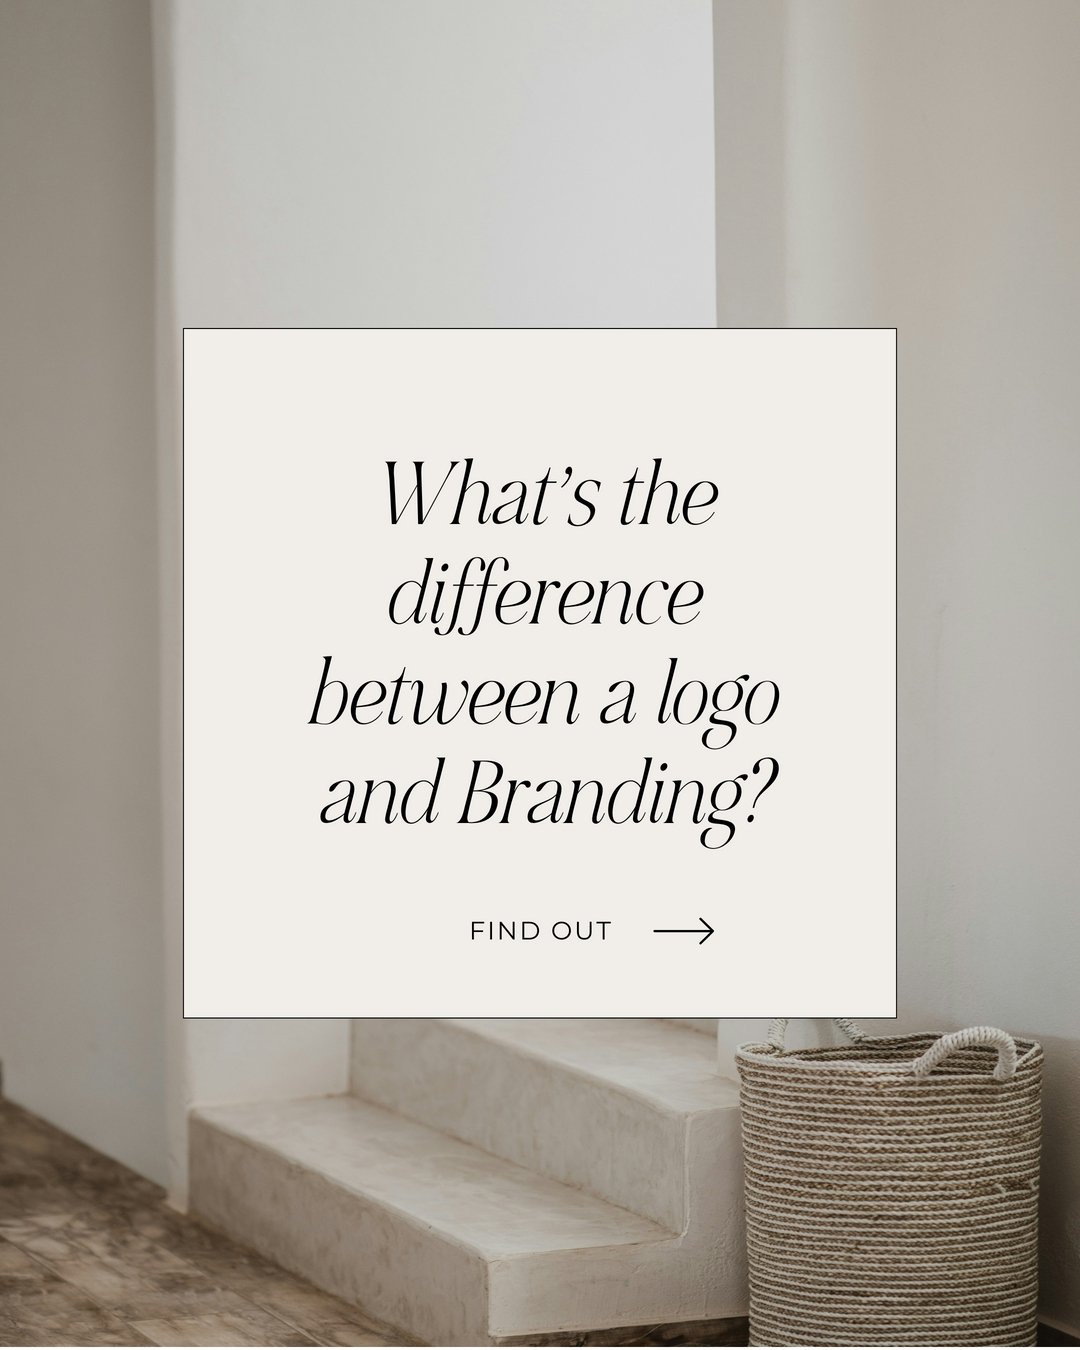 Logo vs. Branding: Why it's NOT the same thing! 

A logo is just one piece of your brand's visual identity.  It's important, but it doesn't tell your whole story.

✨ Swipe to see the difference! ✨

On the first slide, you see how a single logo might 